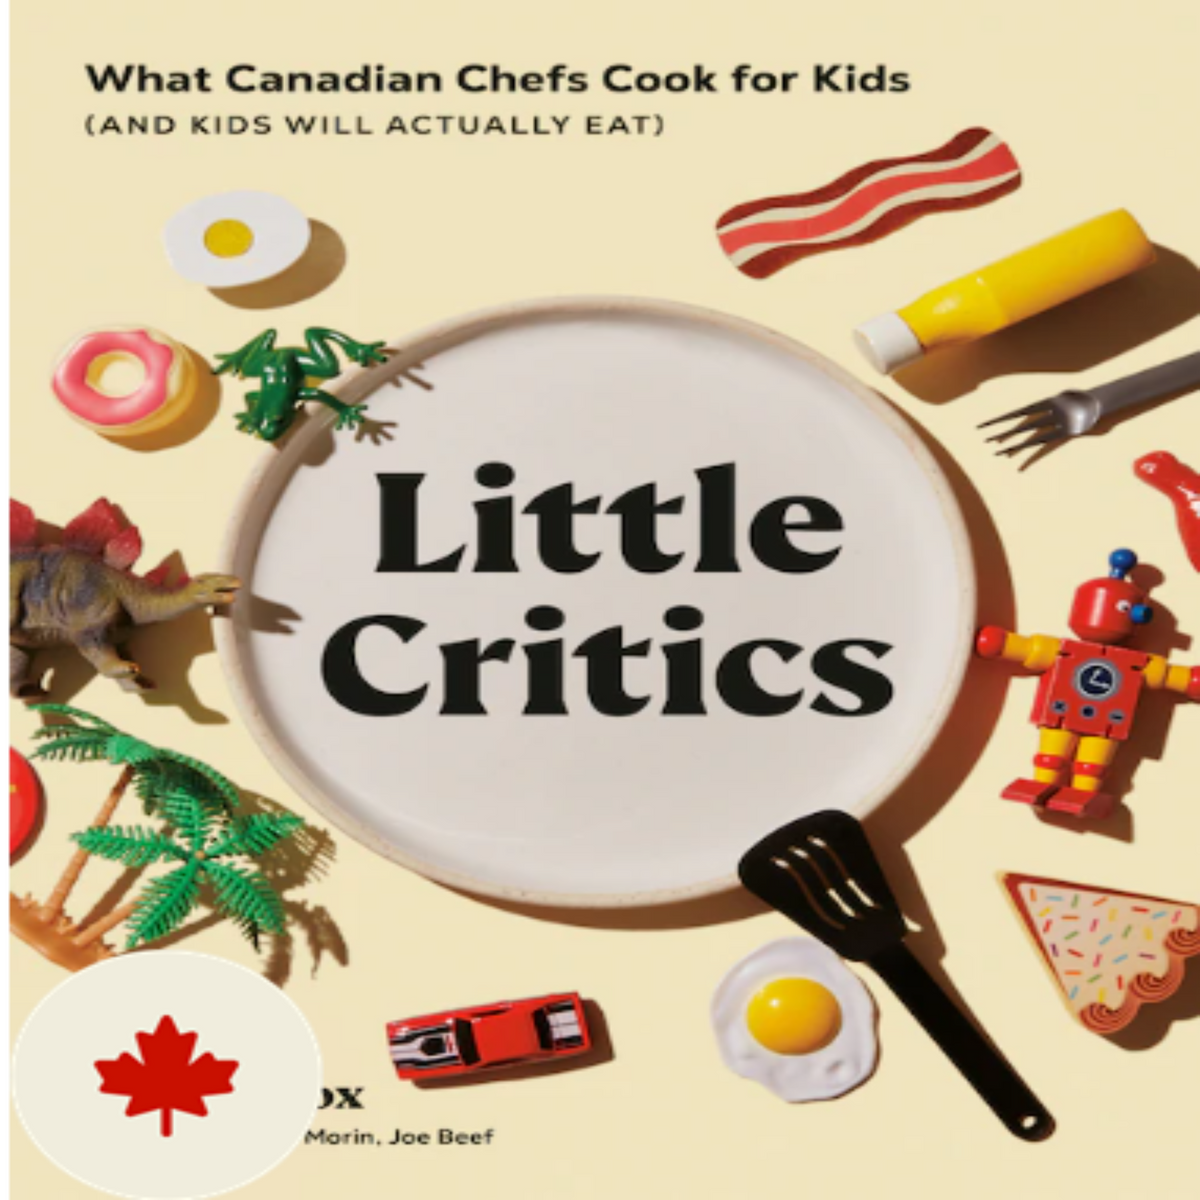 Little Critics: What Canadian Chefs Cook For Kids (And Kids Will Actually Eat)